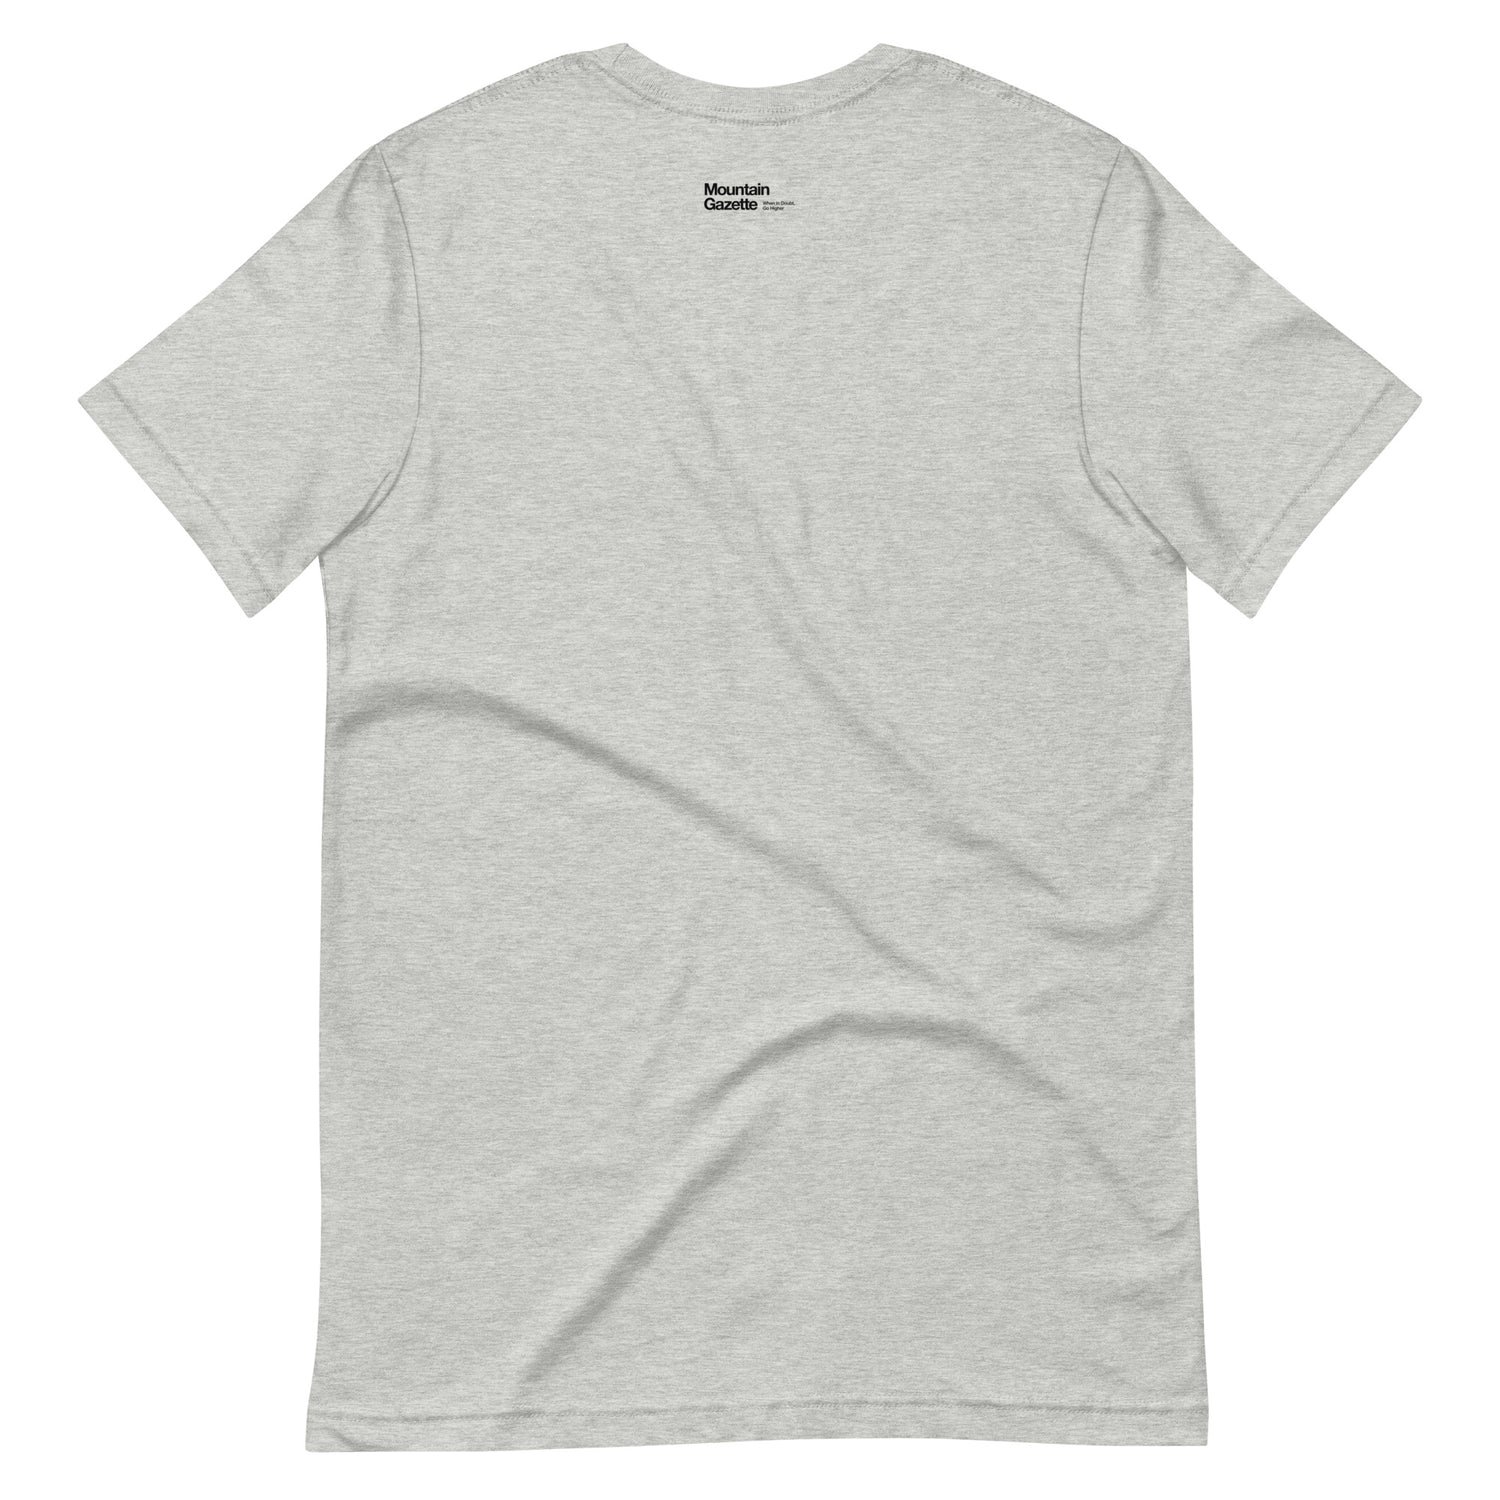 Back of Gray Unisex Short-Sleeve Cotton T-Shirt with text I Love Small Ski Areas